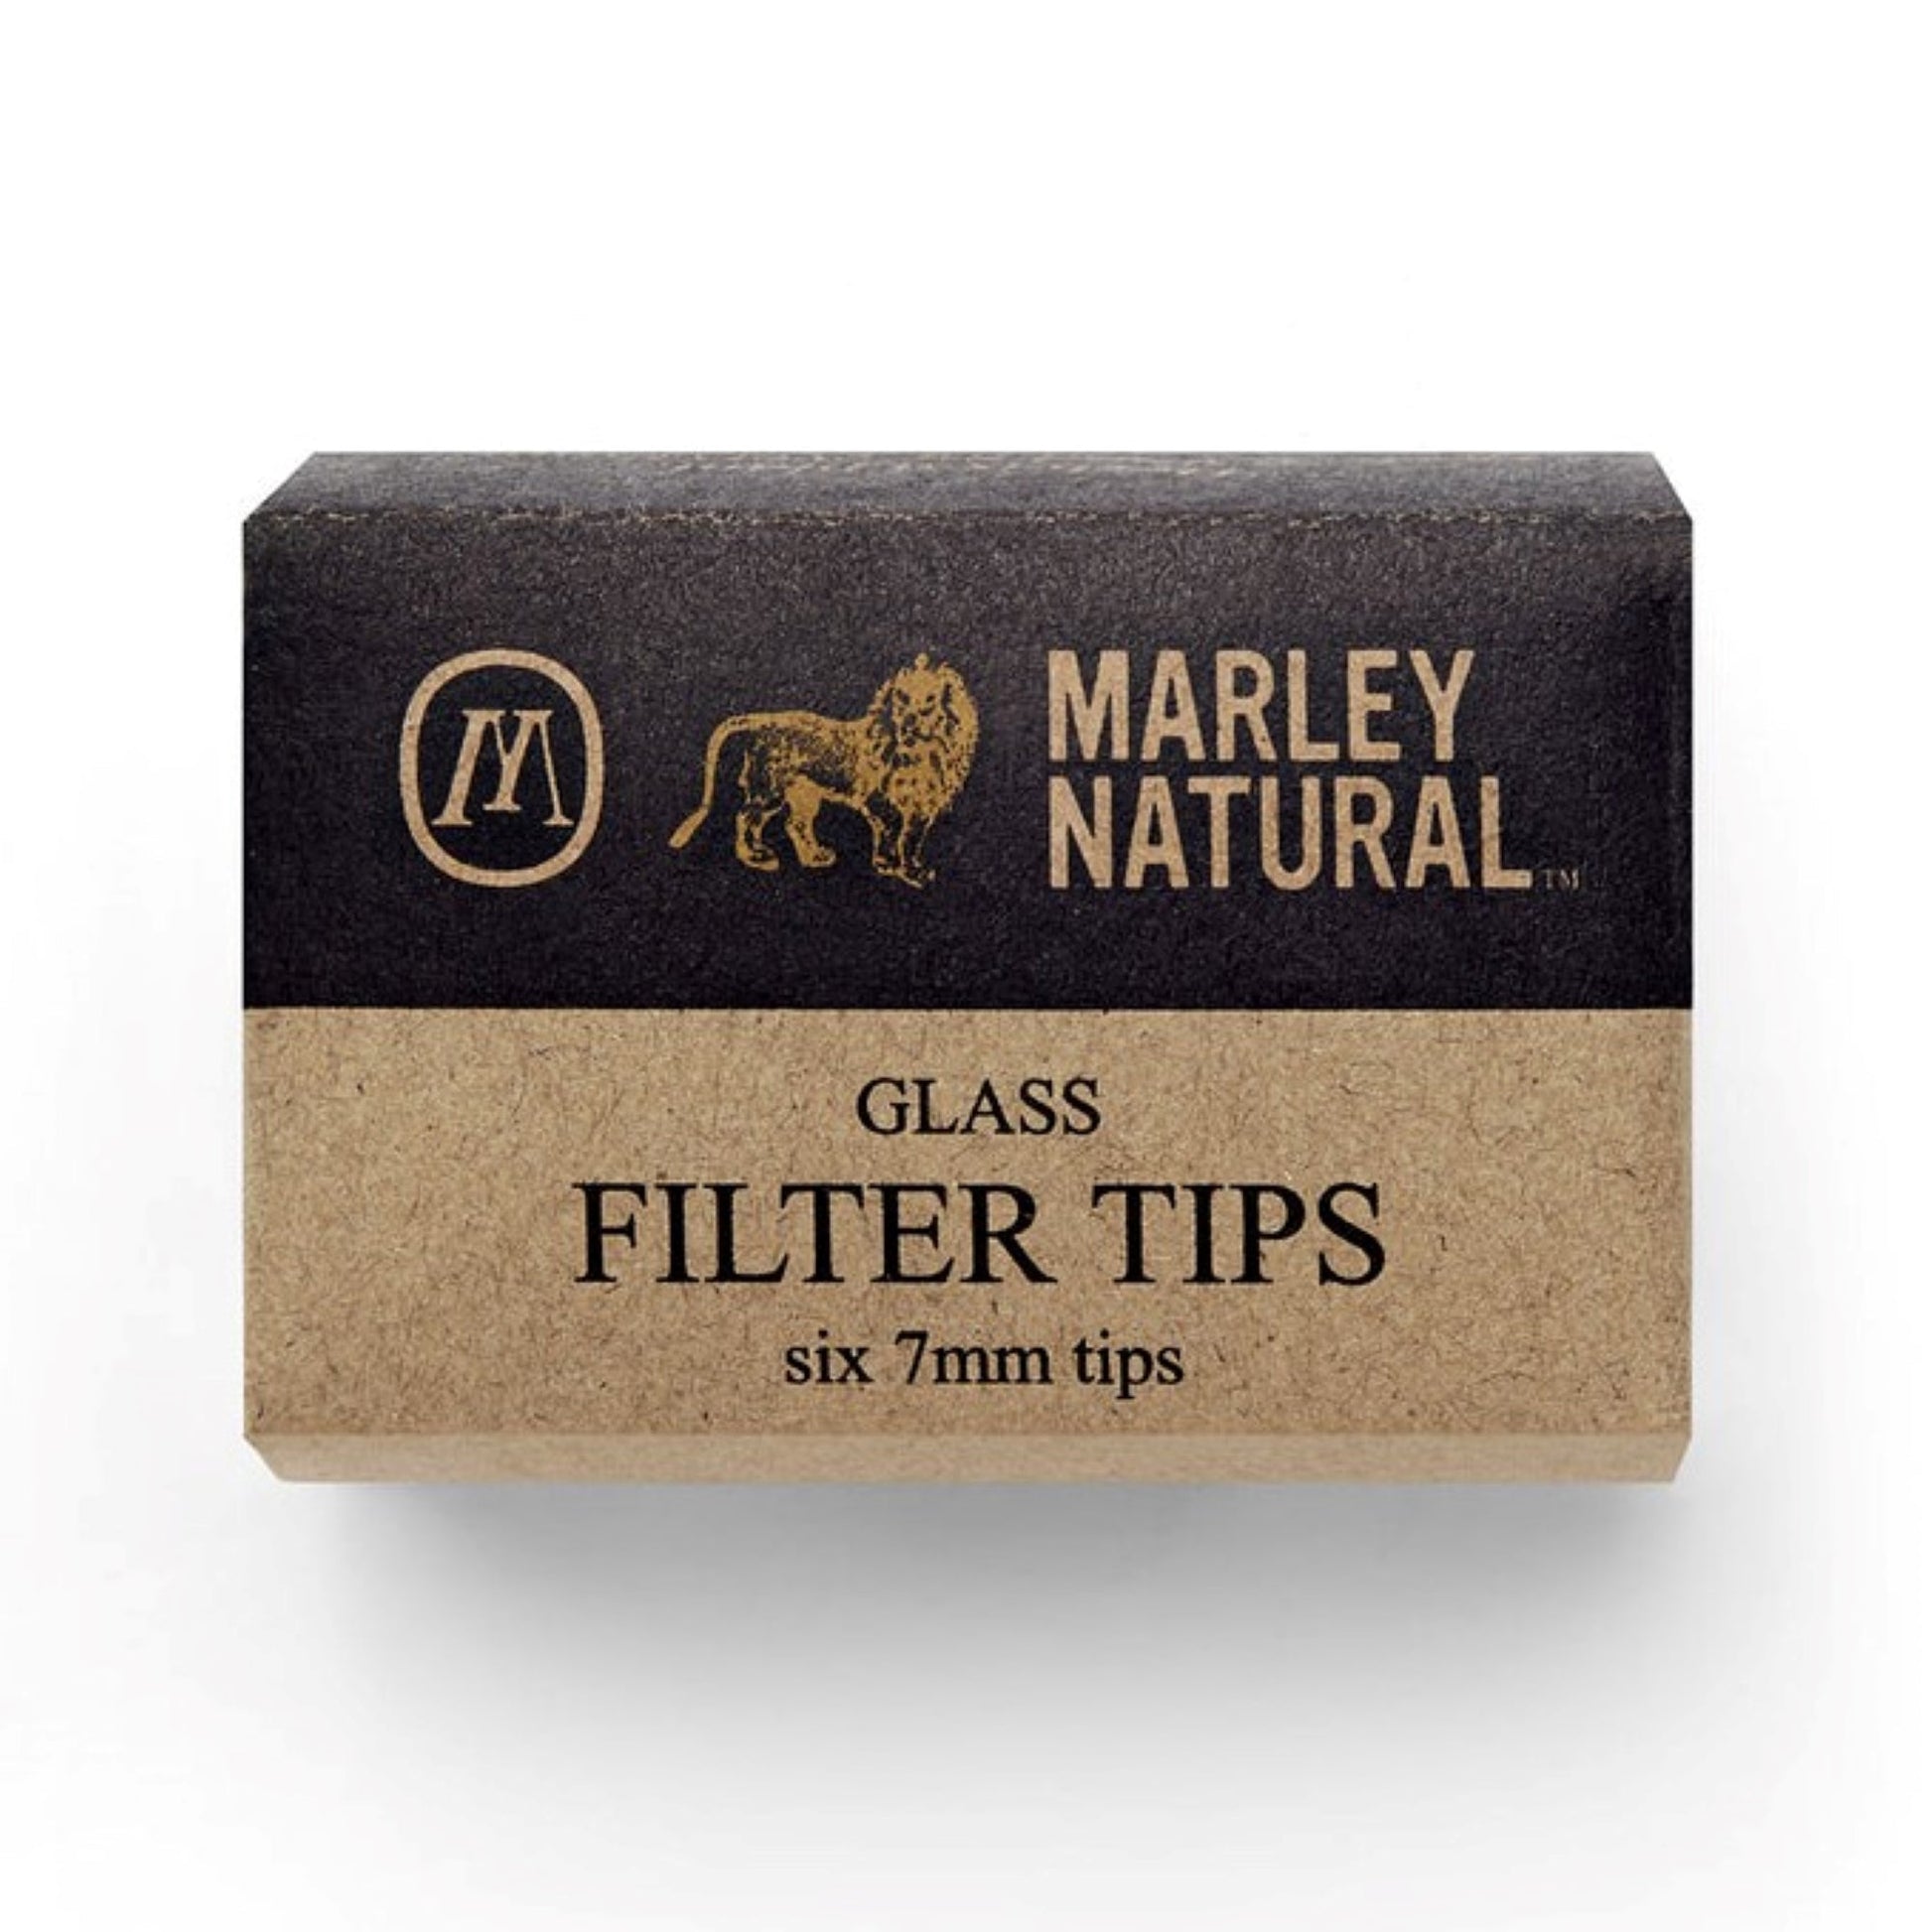 Marley Natural Glass Filter Tips - 6 Pack by Marley Natural | Mission Dispensary